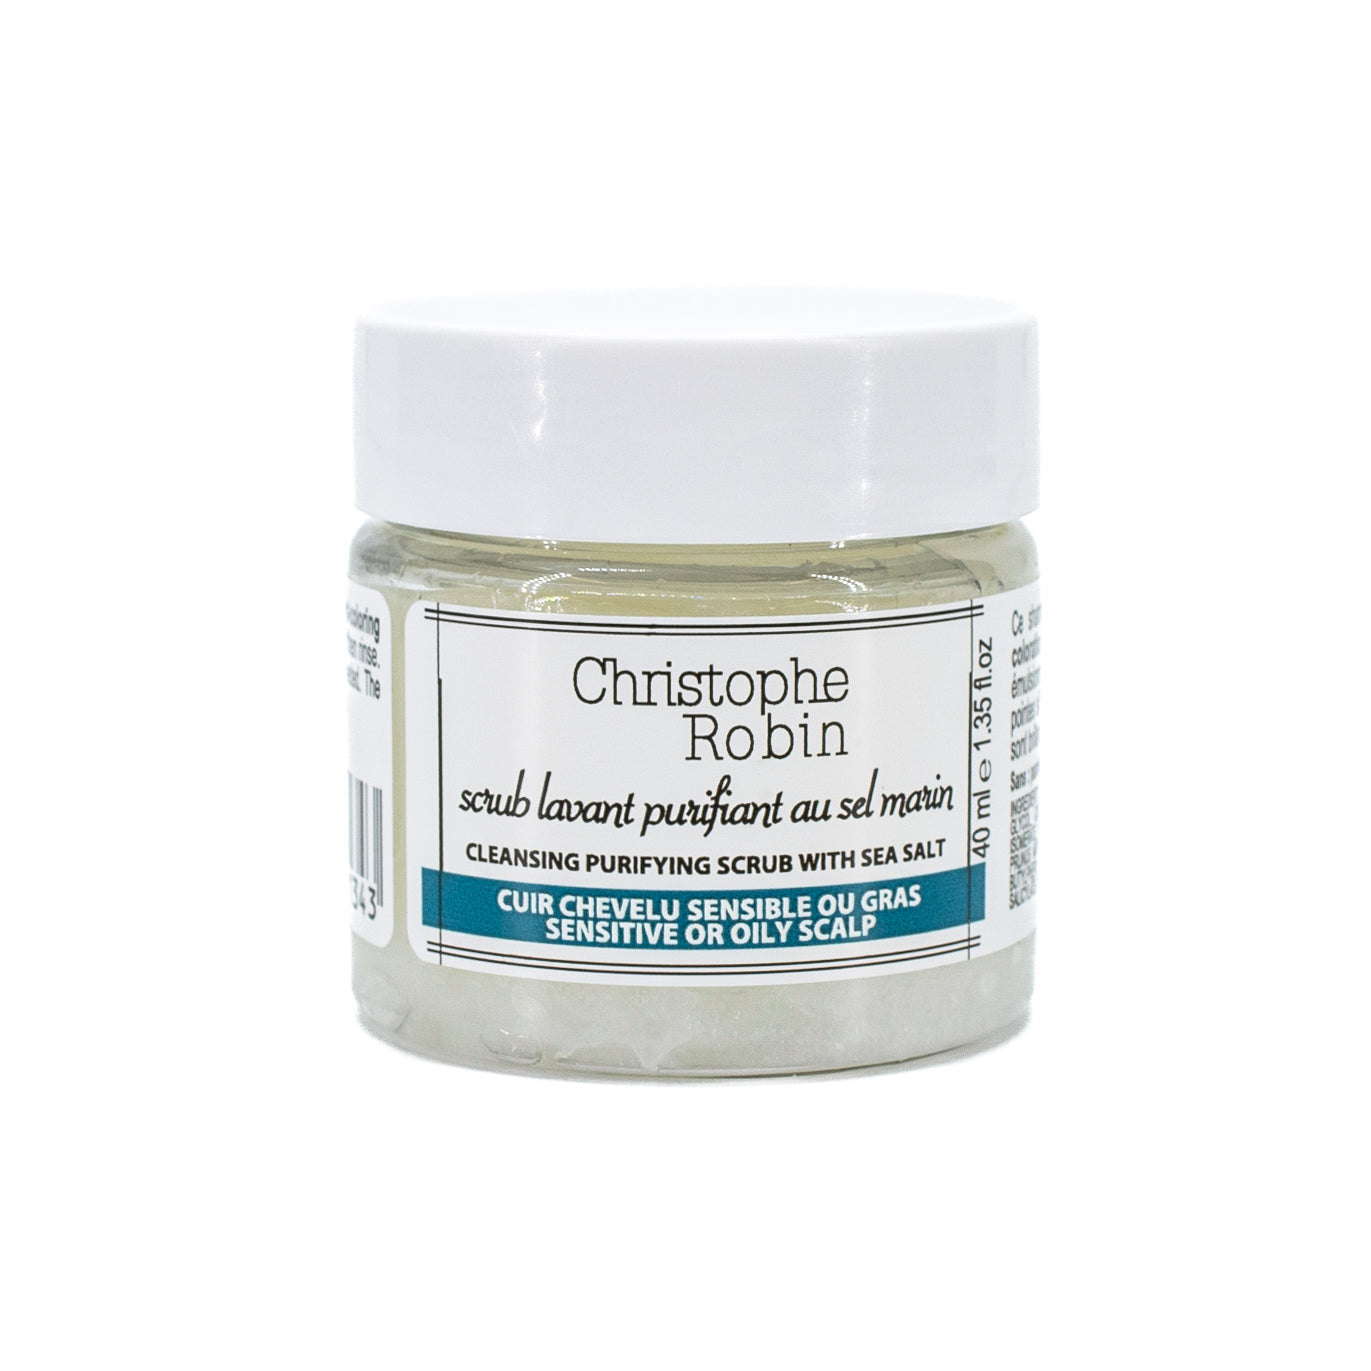 Christophe Robin Cleansing Purifying Scrub with Sea Salt 1.3oz - Imperfect Container